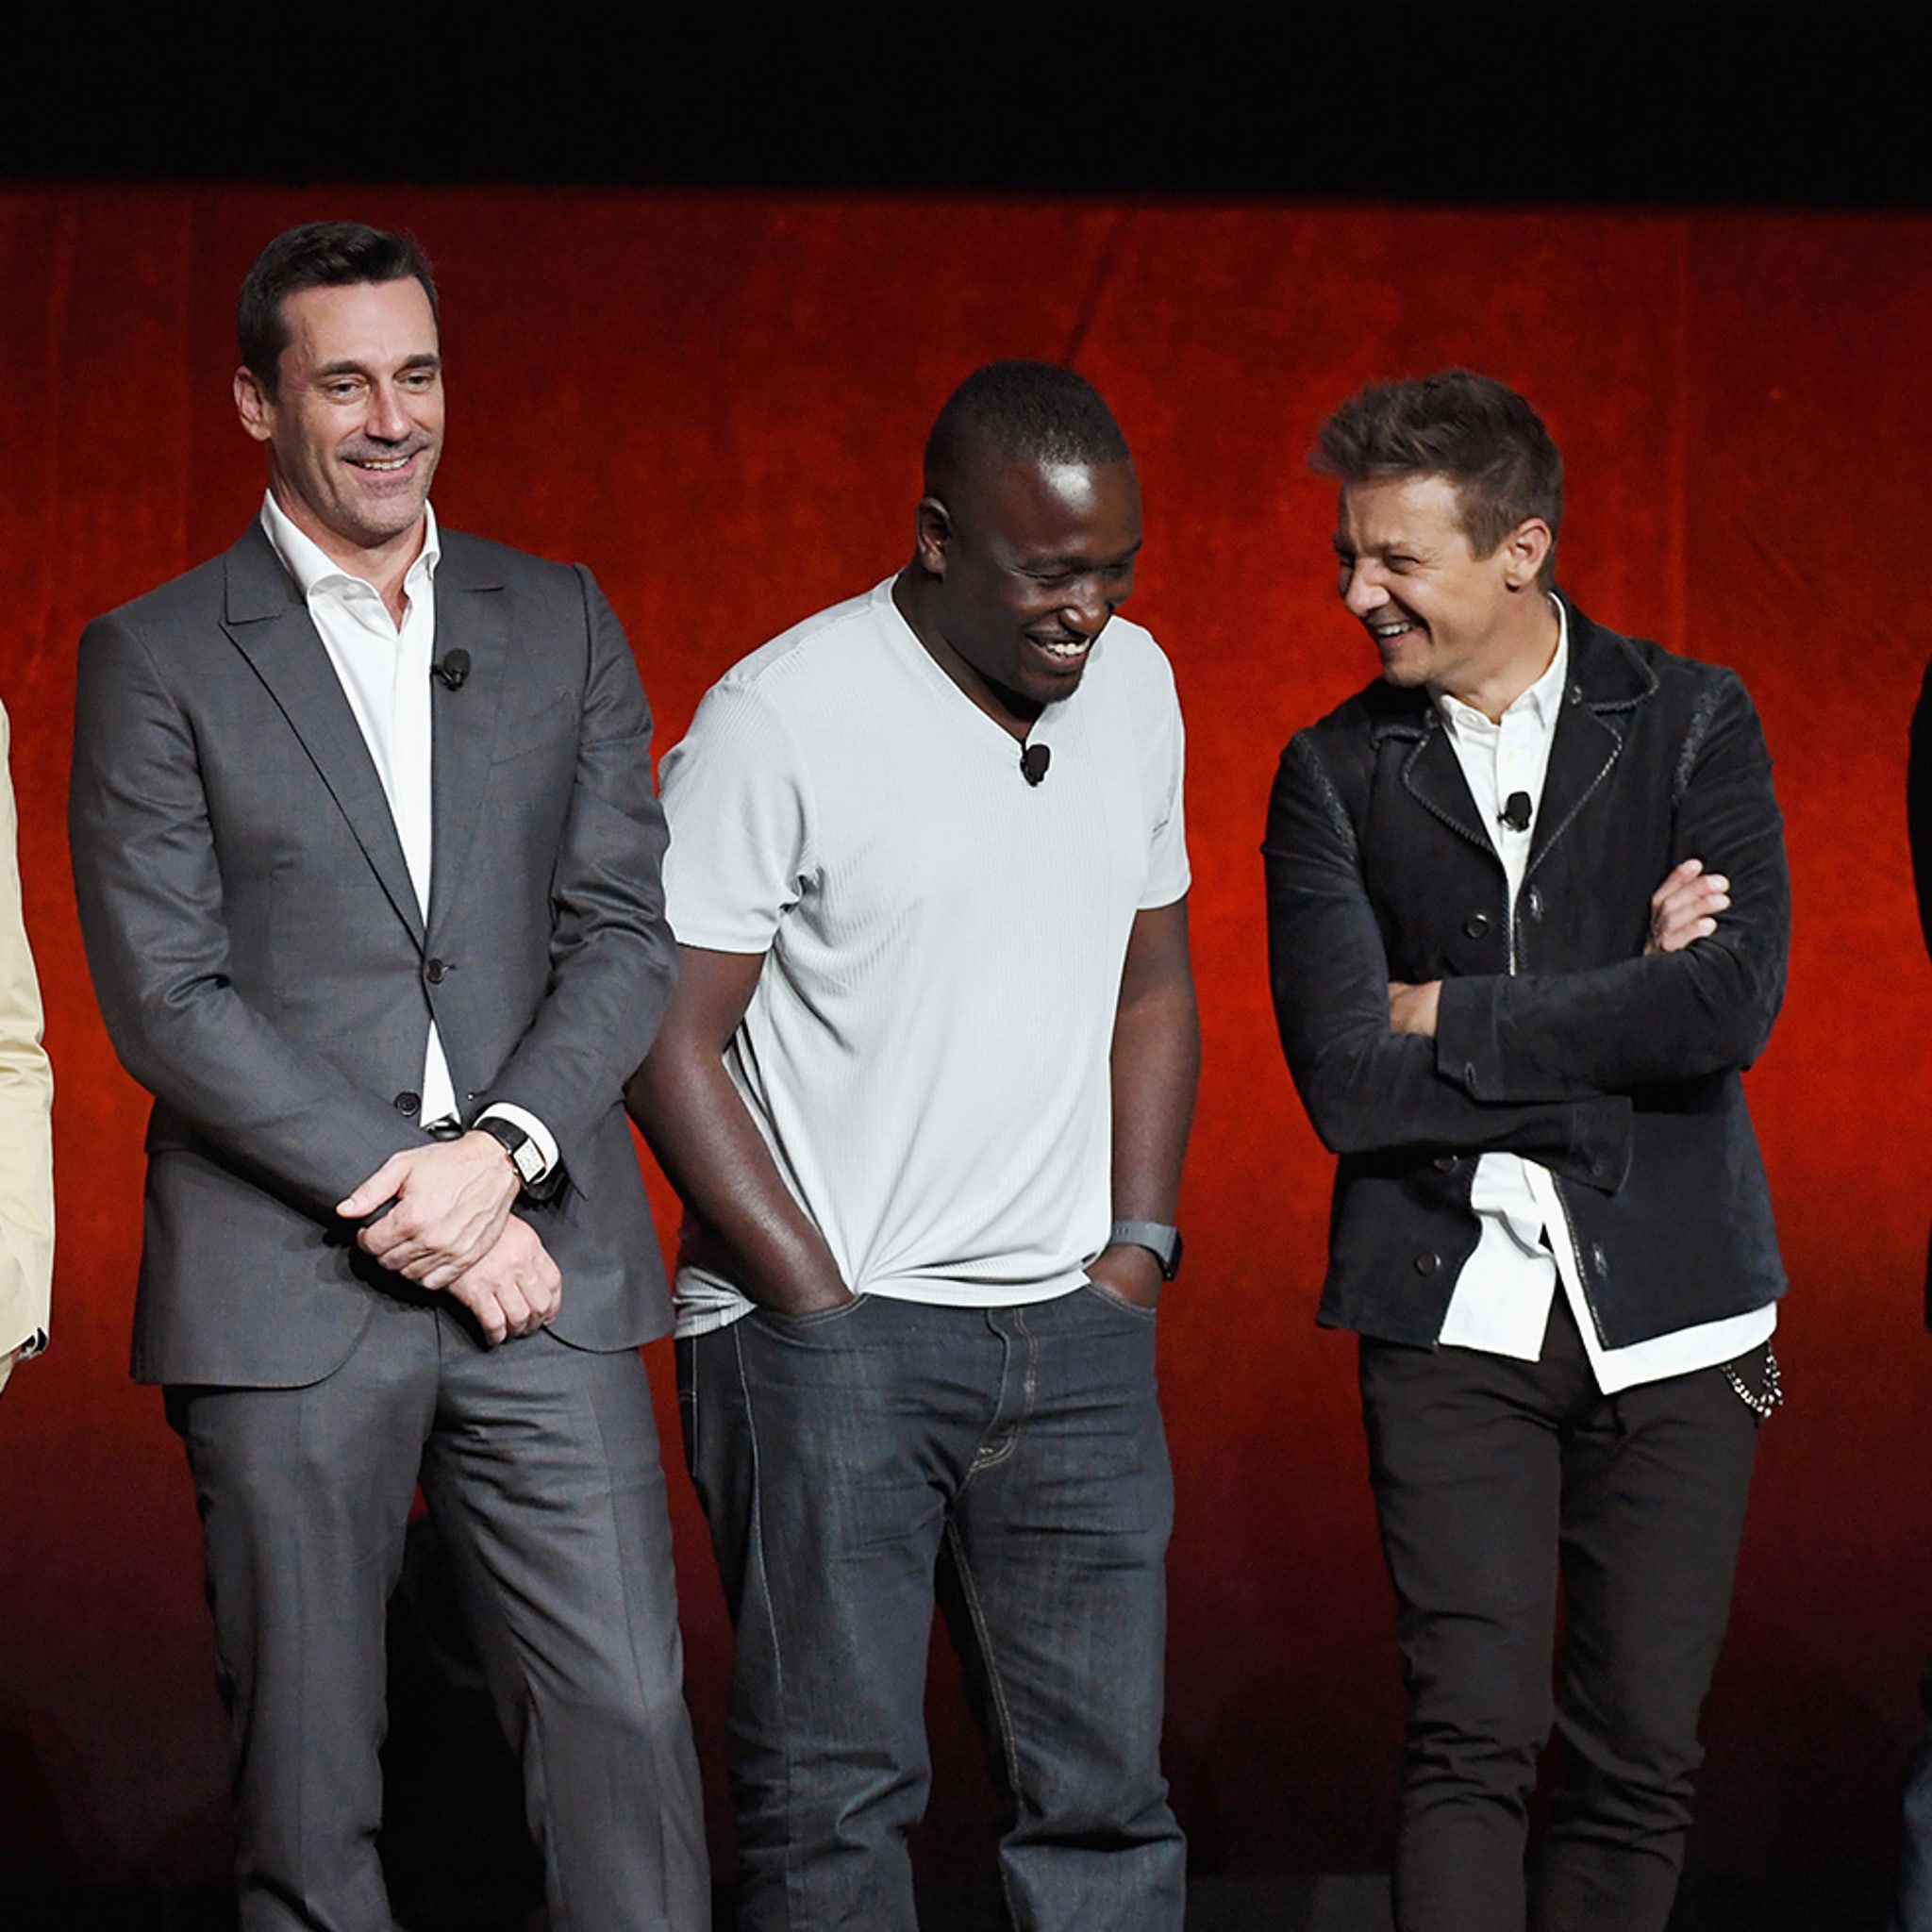 Jon Hamm, Jeremy Renner and Ed Helms talk about 'Tag,' their new